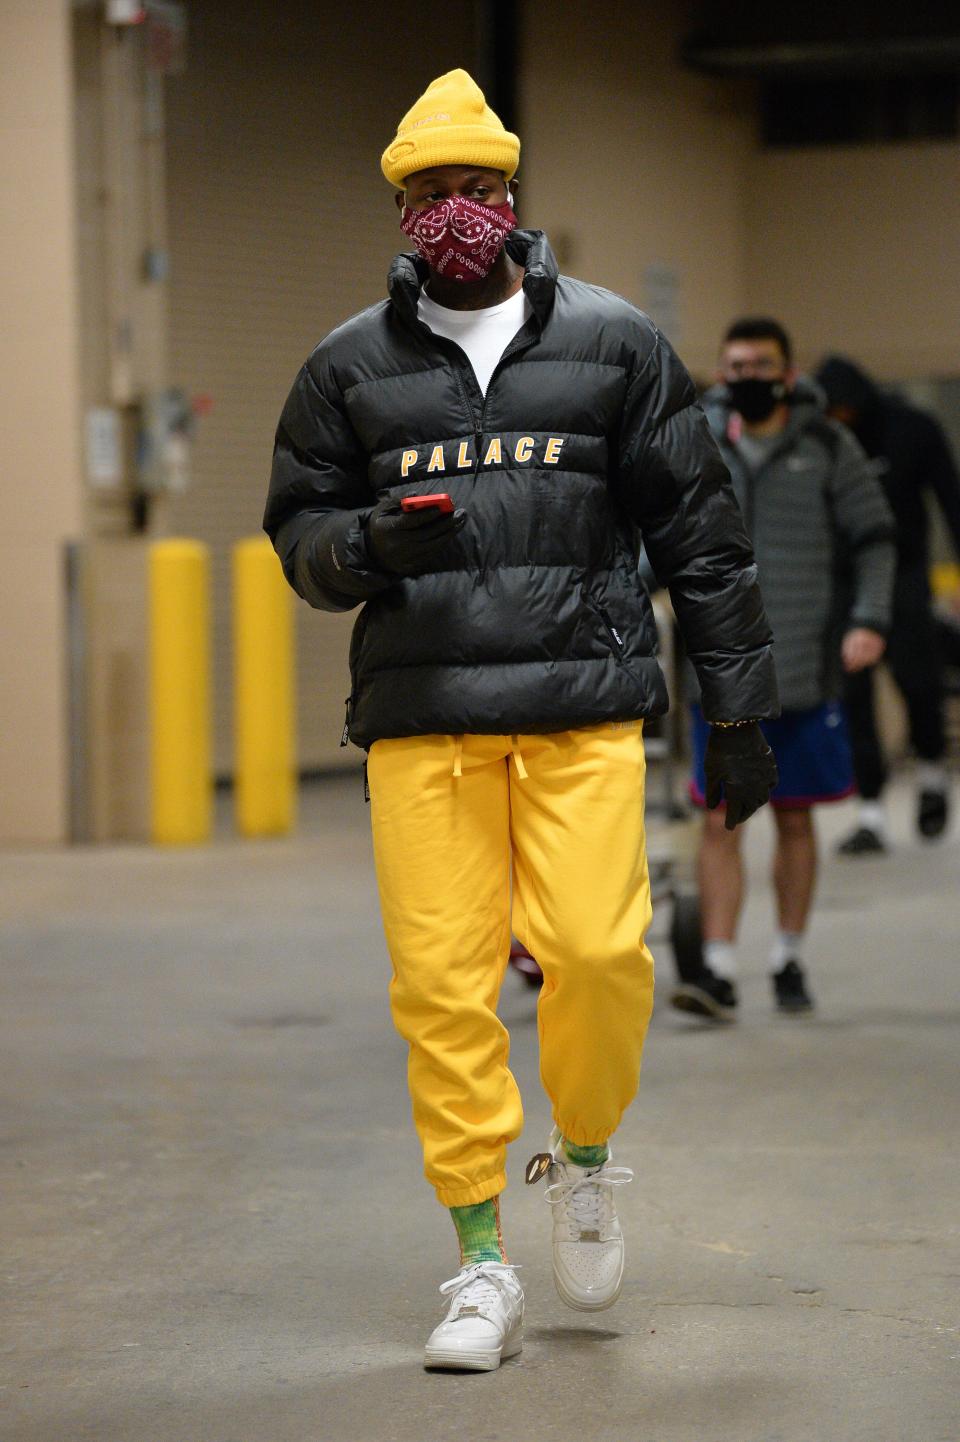 Terry Rozier of the Charlotte Hornets arrives to a game against the Philadelphia 76ers in Philadelphia, January 2, 2021.